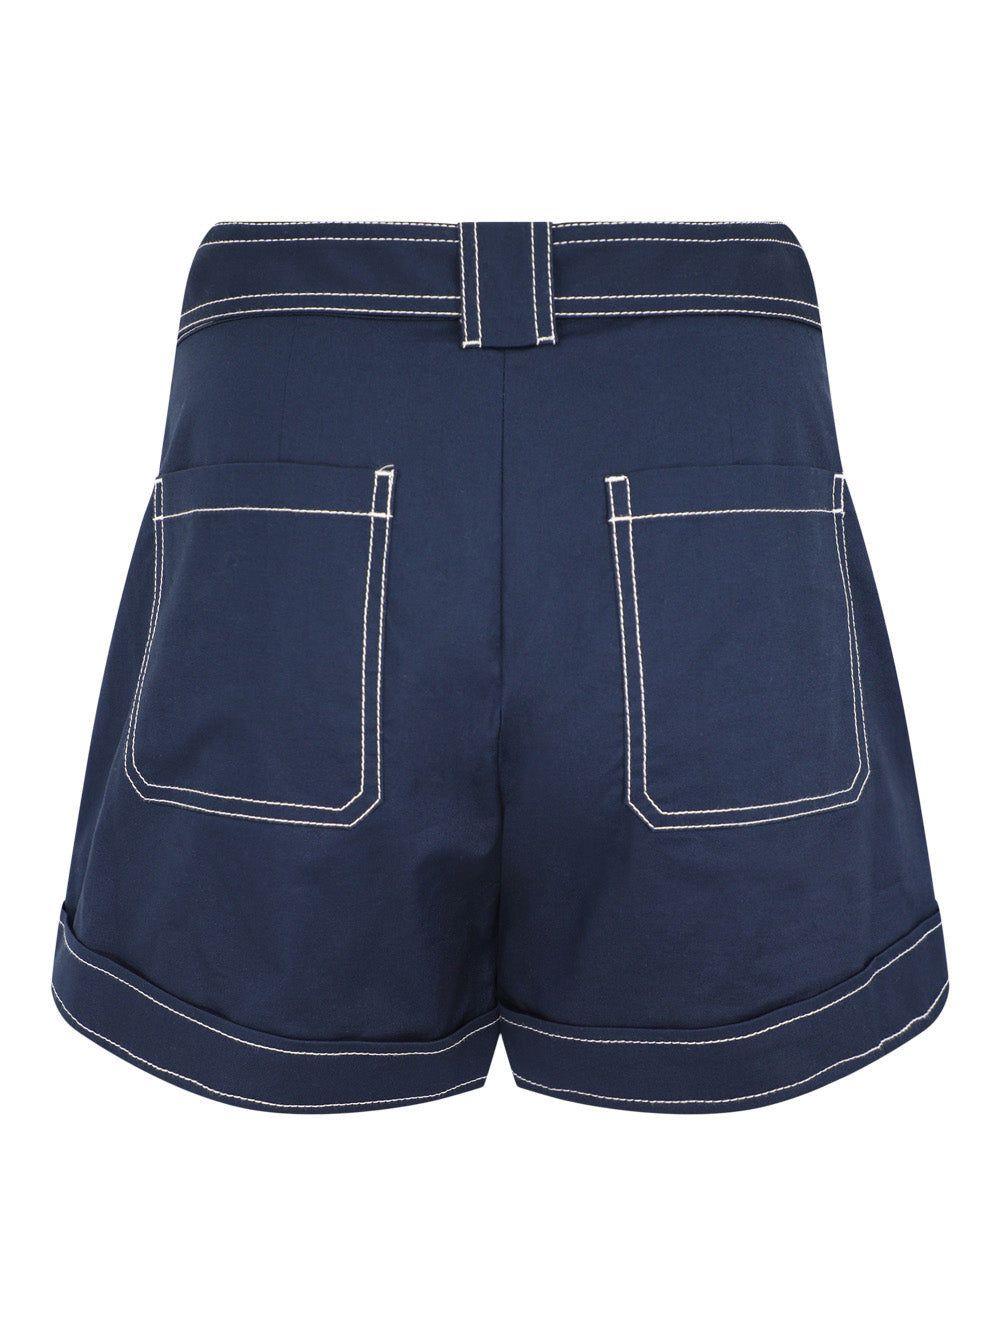 Simkhai Lourie Belted Shorts in Midnight